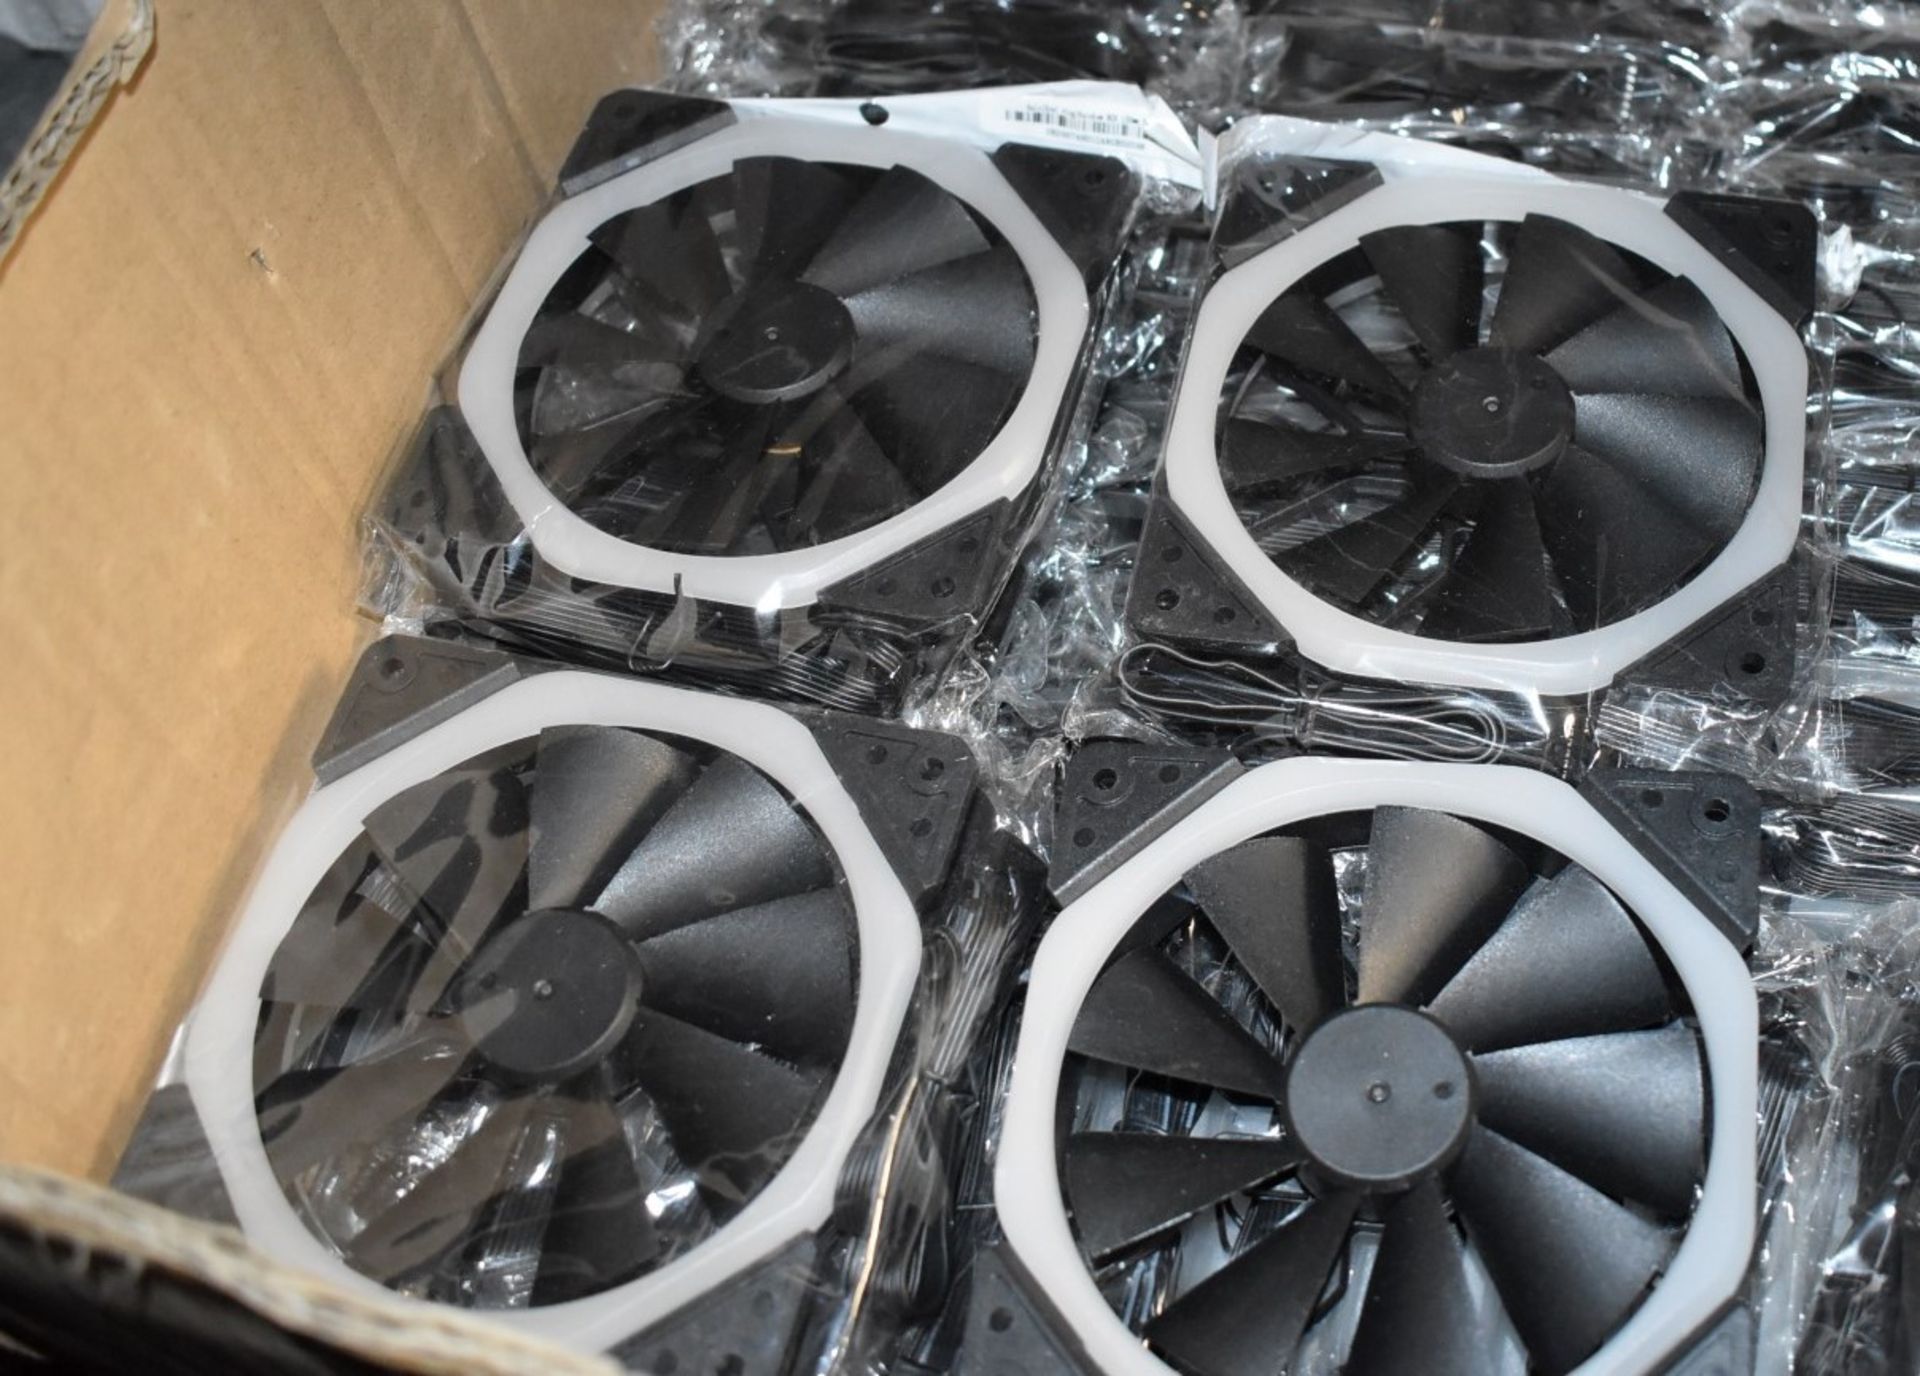 6 x Halo PC Gaming Case 120mm Cooling Fans - Dual-Ring, RGB LED, Hydro Bearing, 9 Blade Fan, For - Image 2 of 5